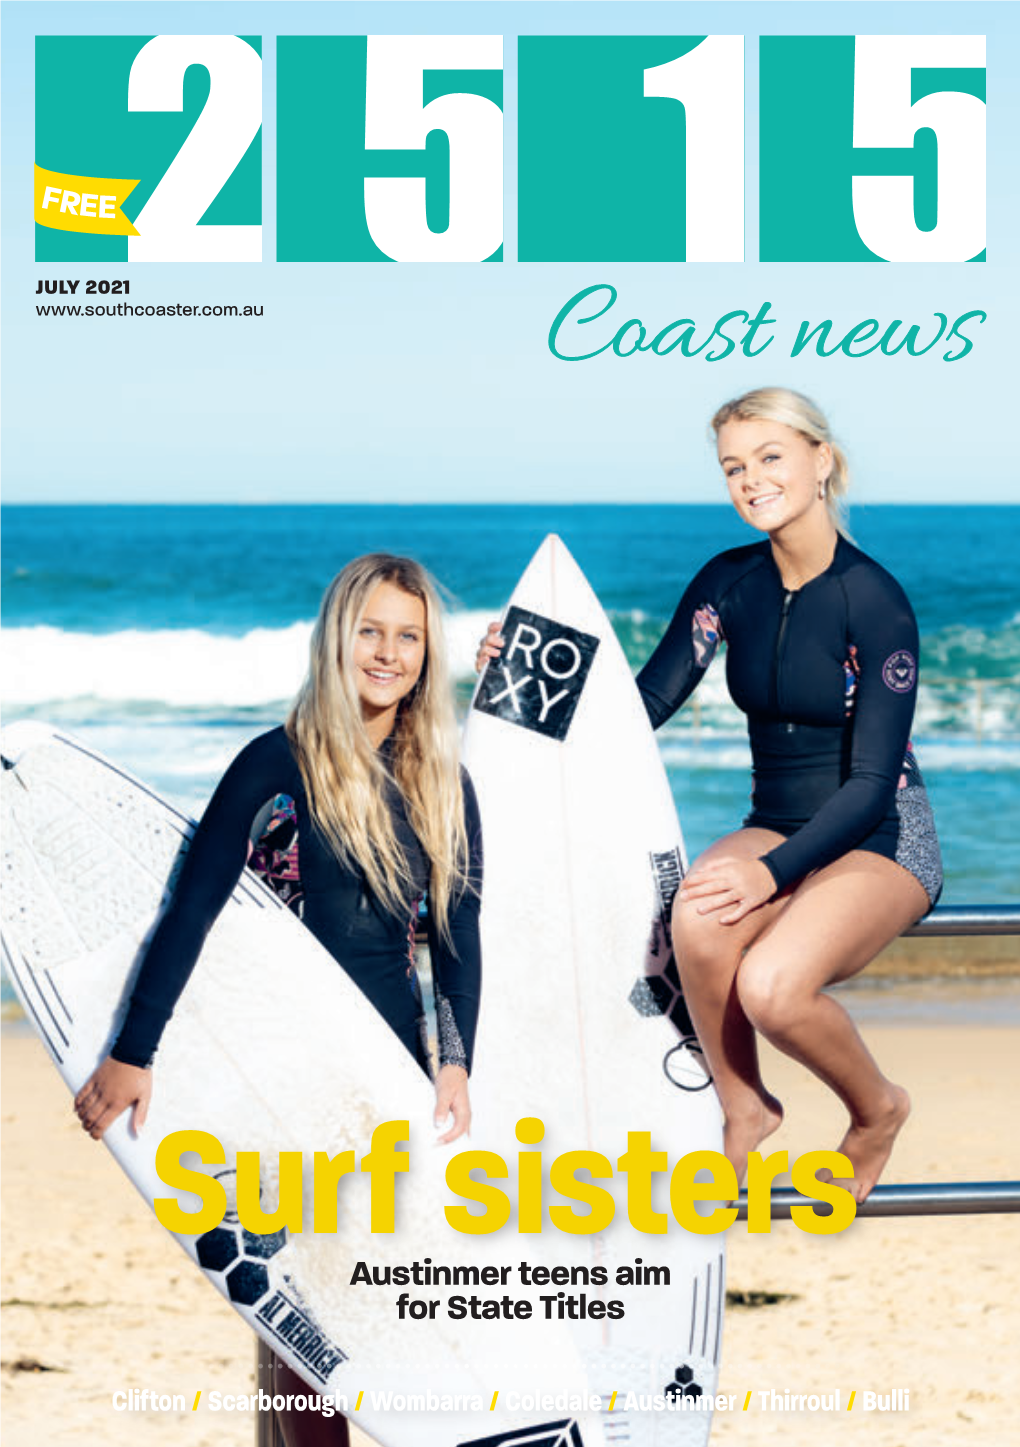 Surf Sisters Austinmer Teens Aim for State Titles